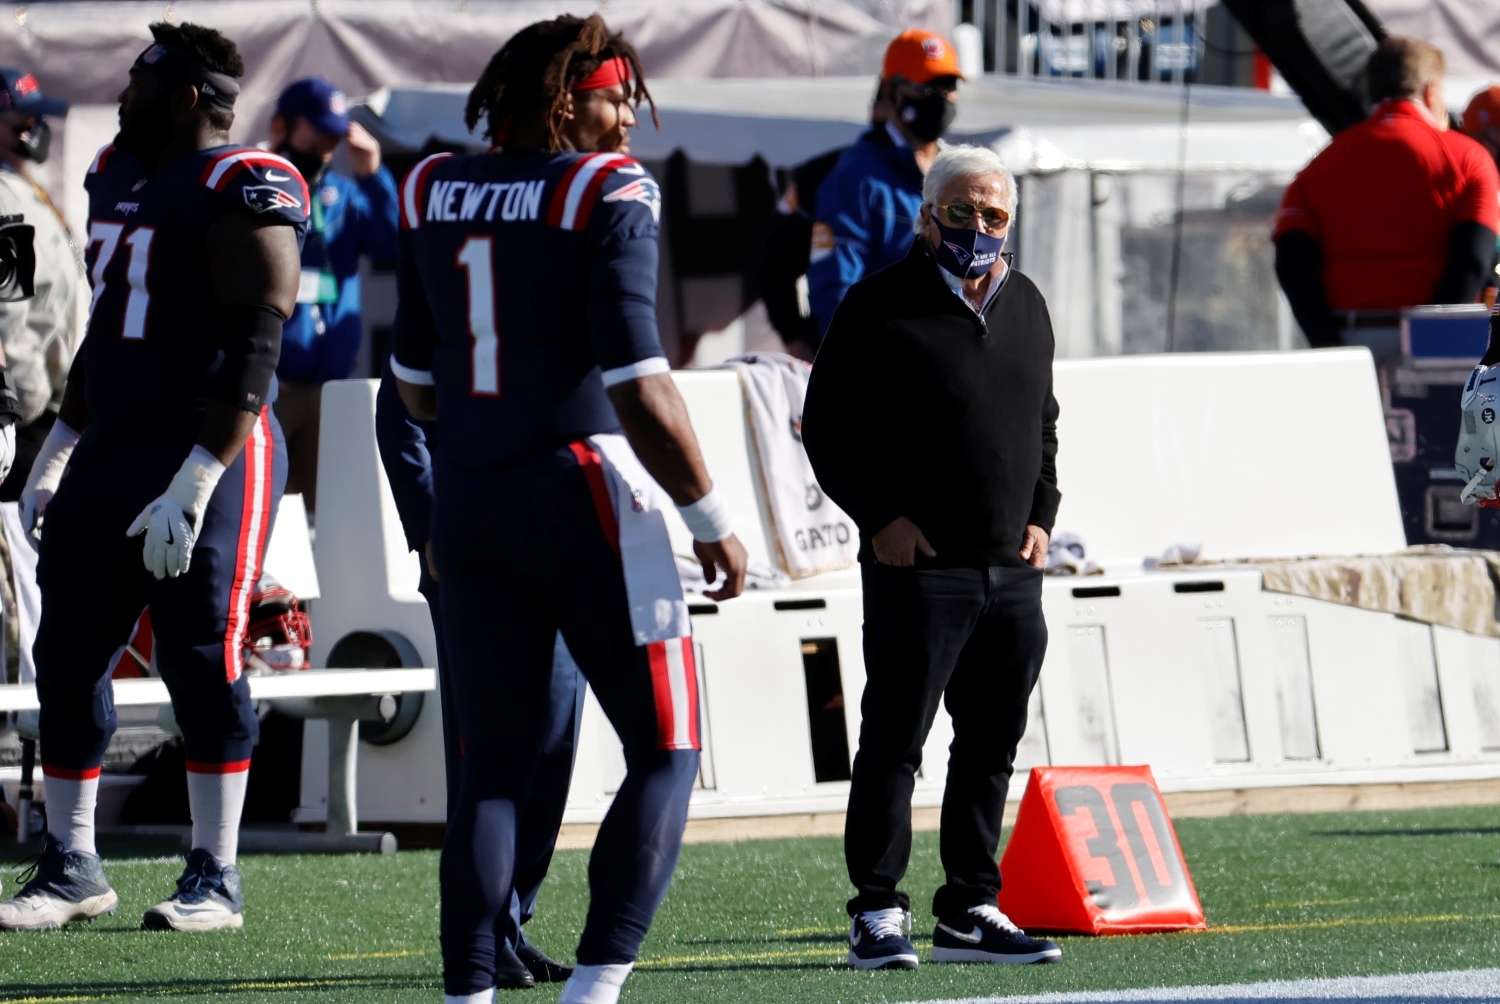 Patriots owner Robert Kraft watches Cam Newton warming up from the sideline.